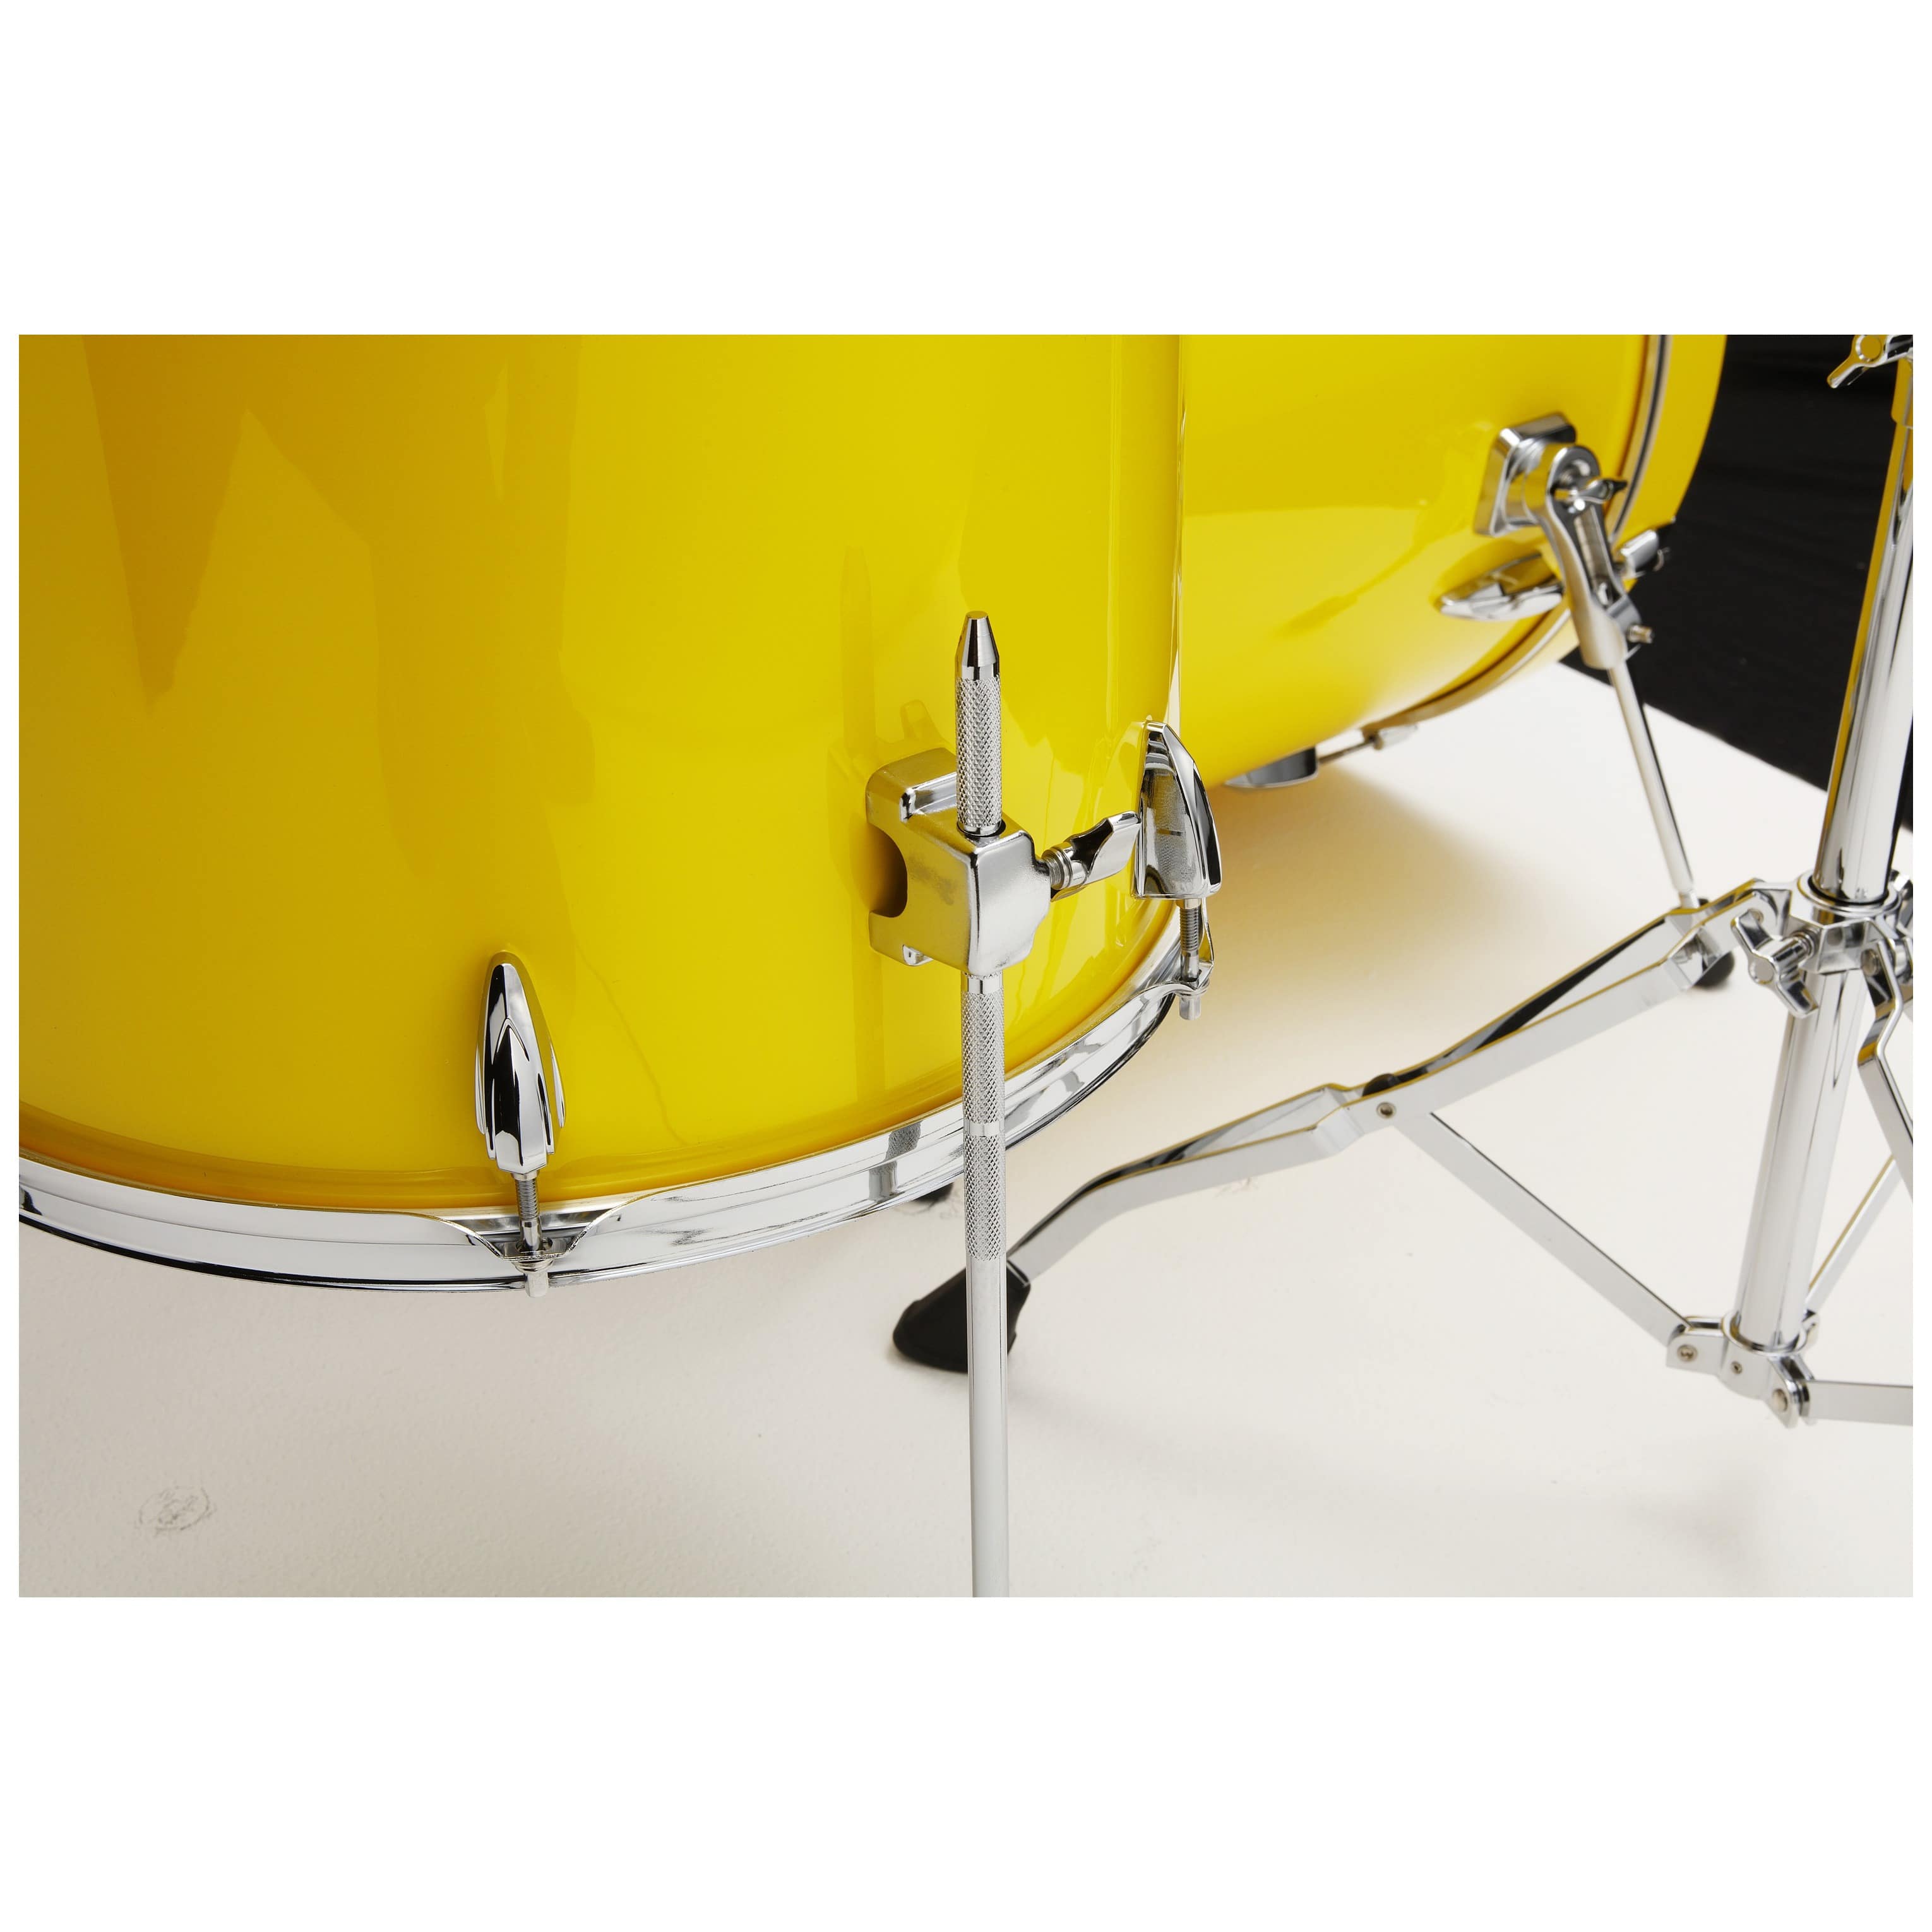 Tama IP52H6W-ELY Imperialstar Drumset 5 teilig - Electric Yellow / Chrom HW + MEINL Cymbals HCS Bronze 4